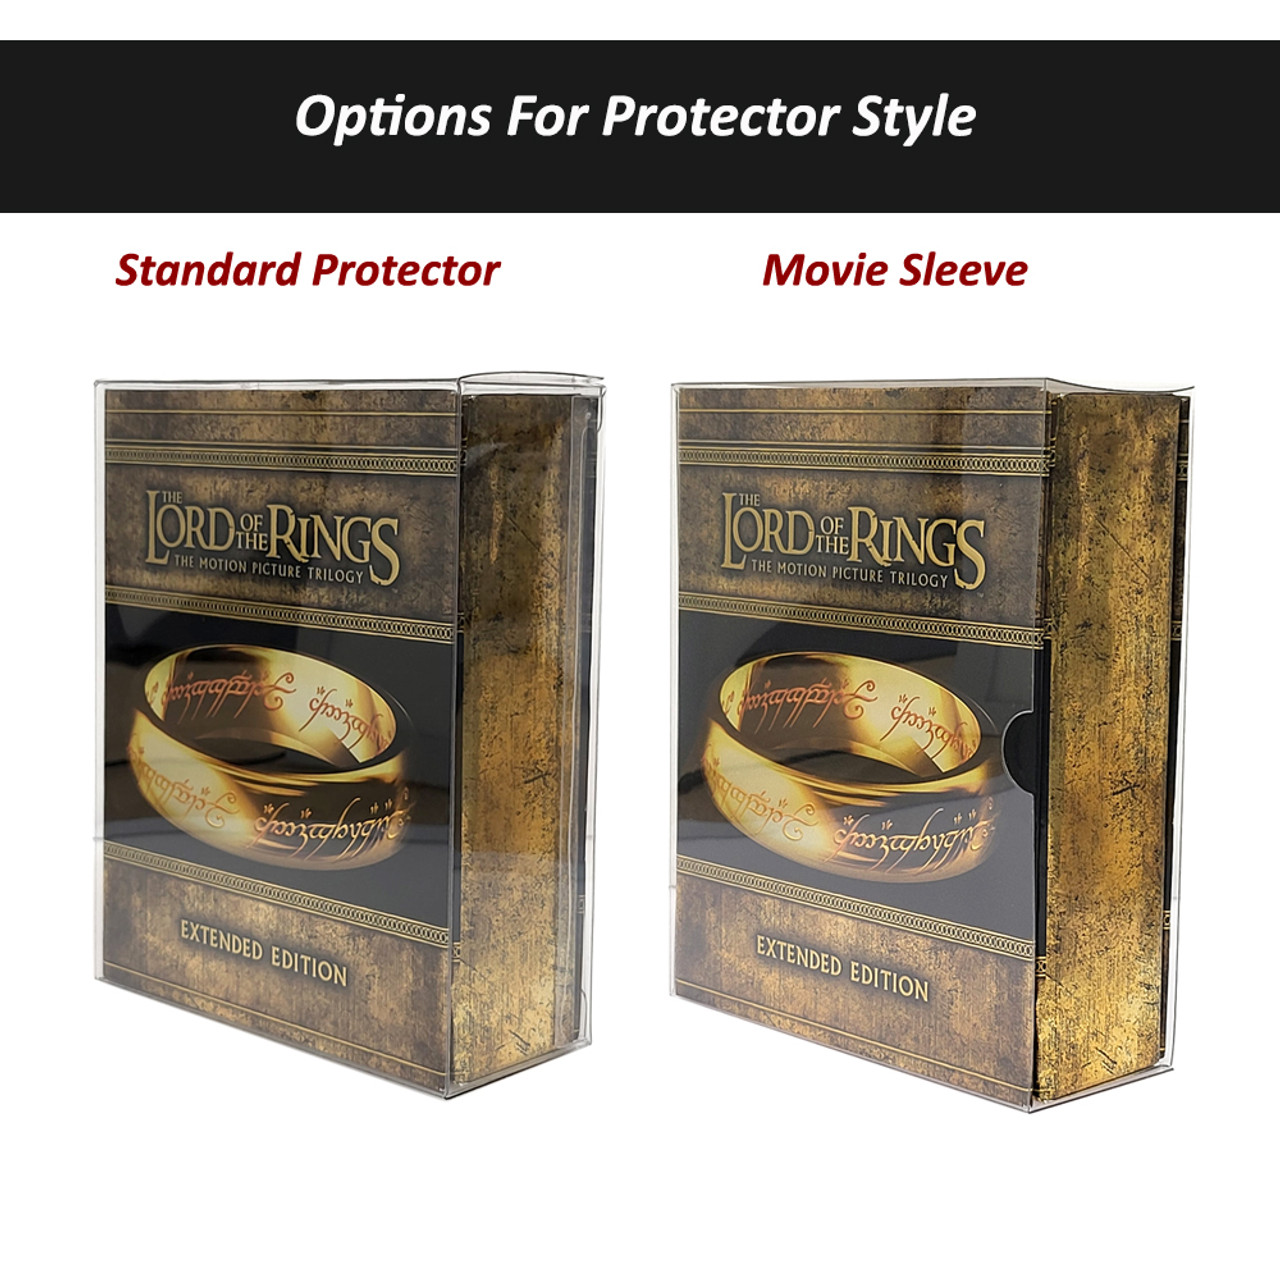 Protector For Tremors 2 (Arrow Video)